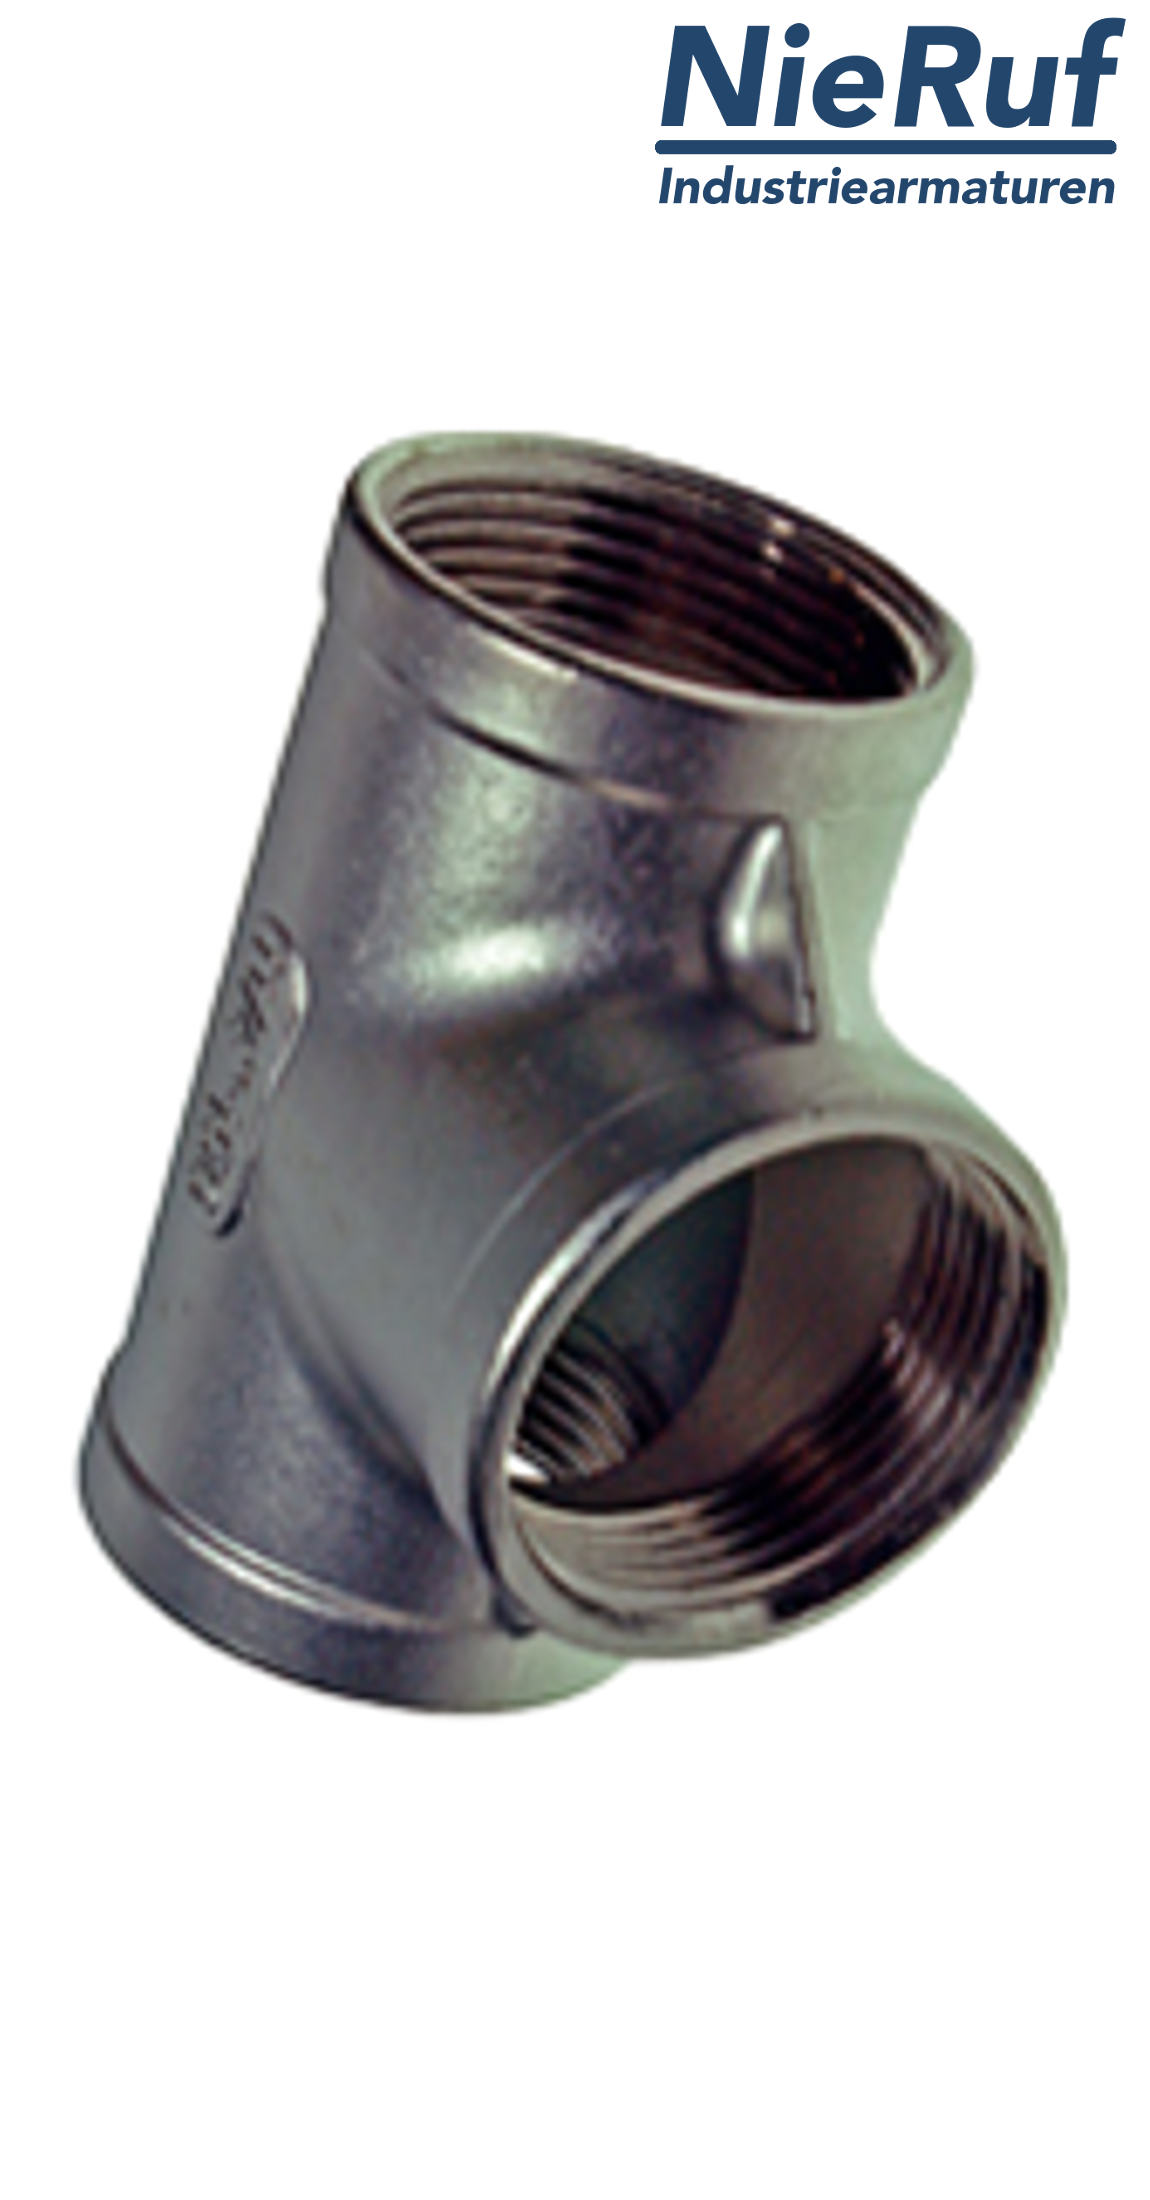 T-fitting 1 1/2" inch NPT stainless steel 316 90° angle FM